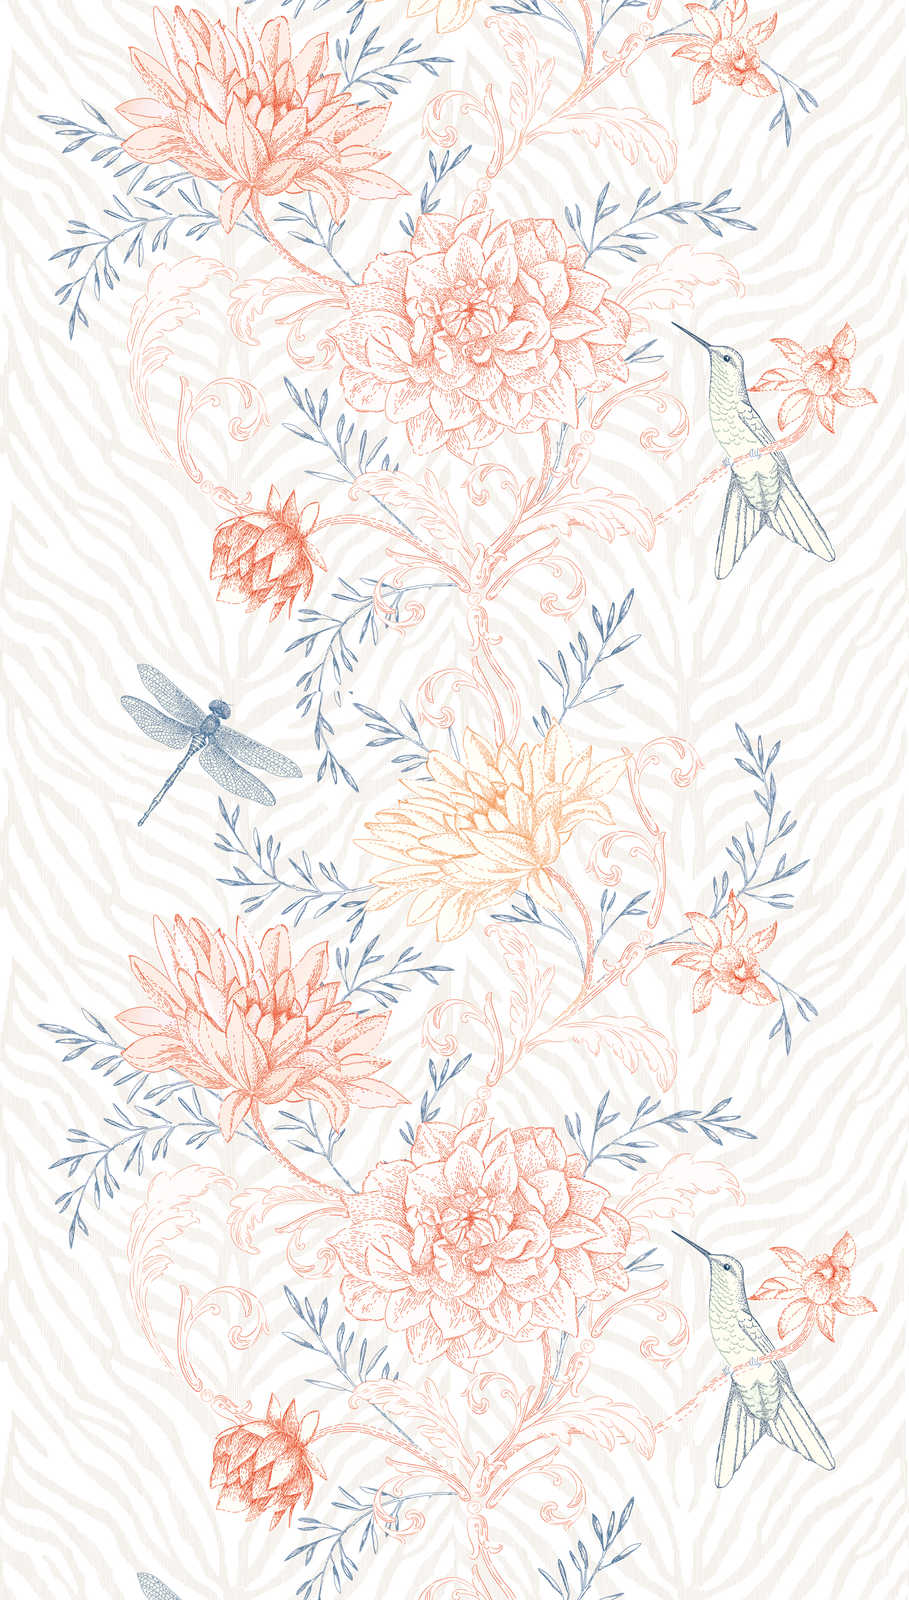             Bright flower tendrils wallpaper with birds and dragonflies - colourful, orange, blue
        